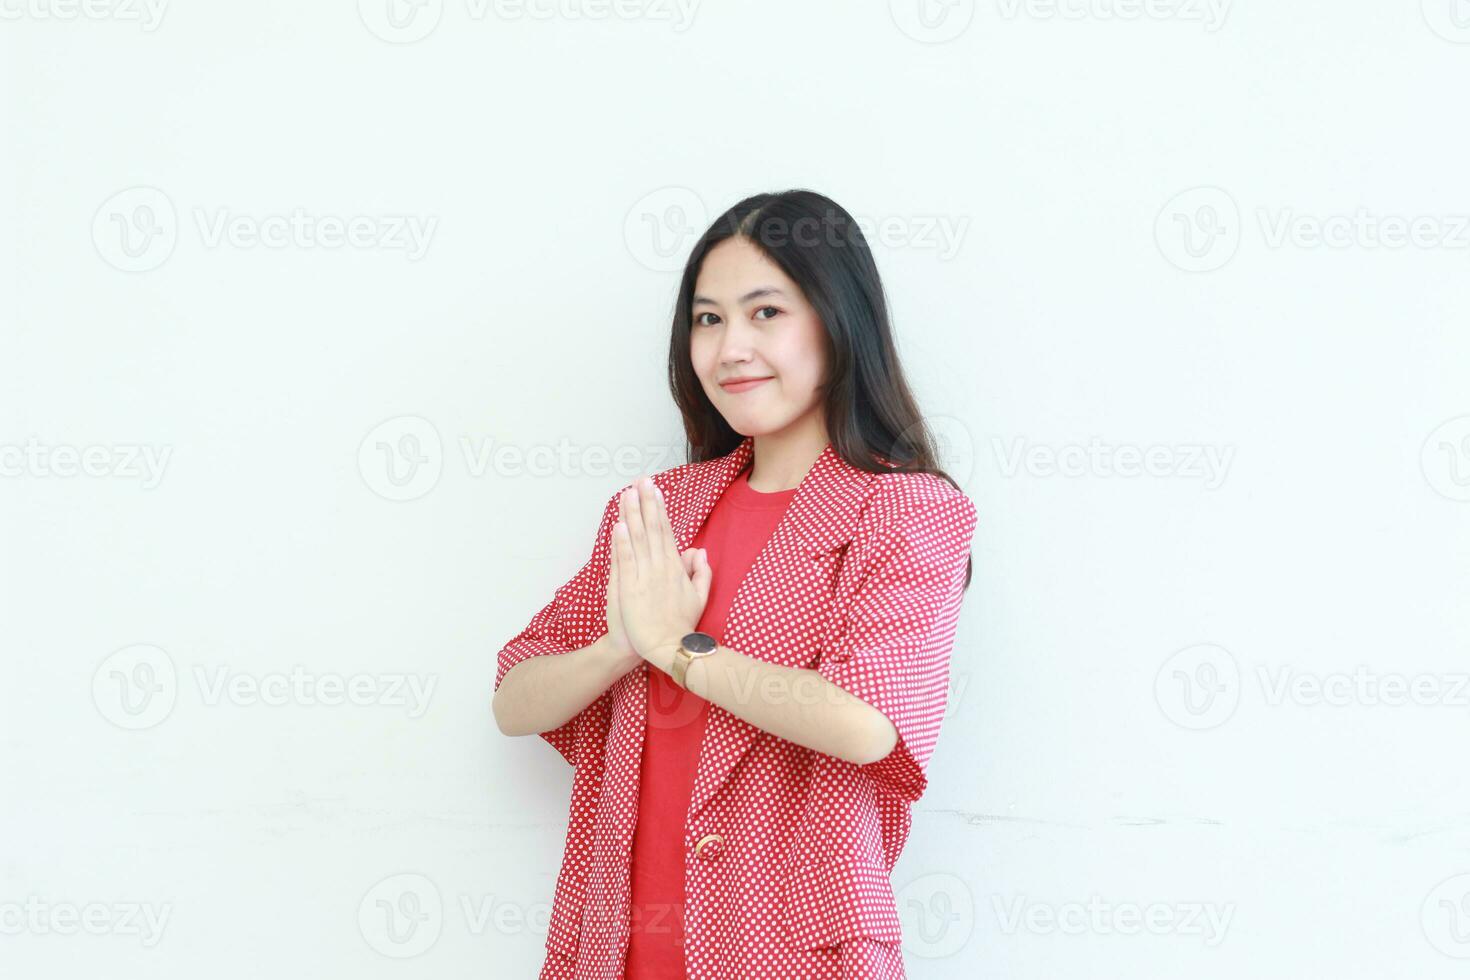 portrait of beautiful asian woman wearing red outfit with namaste gesture while smiling photo